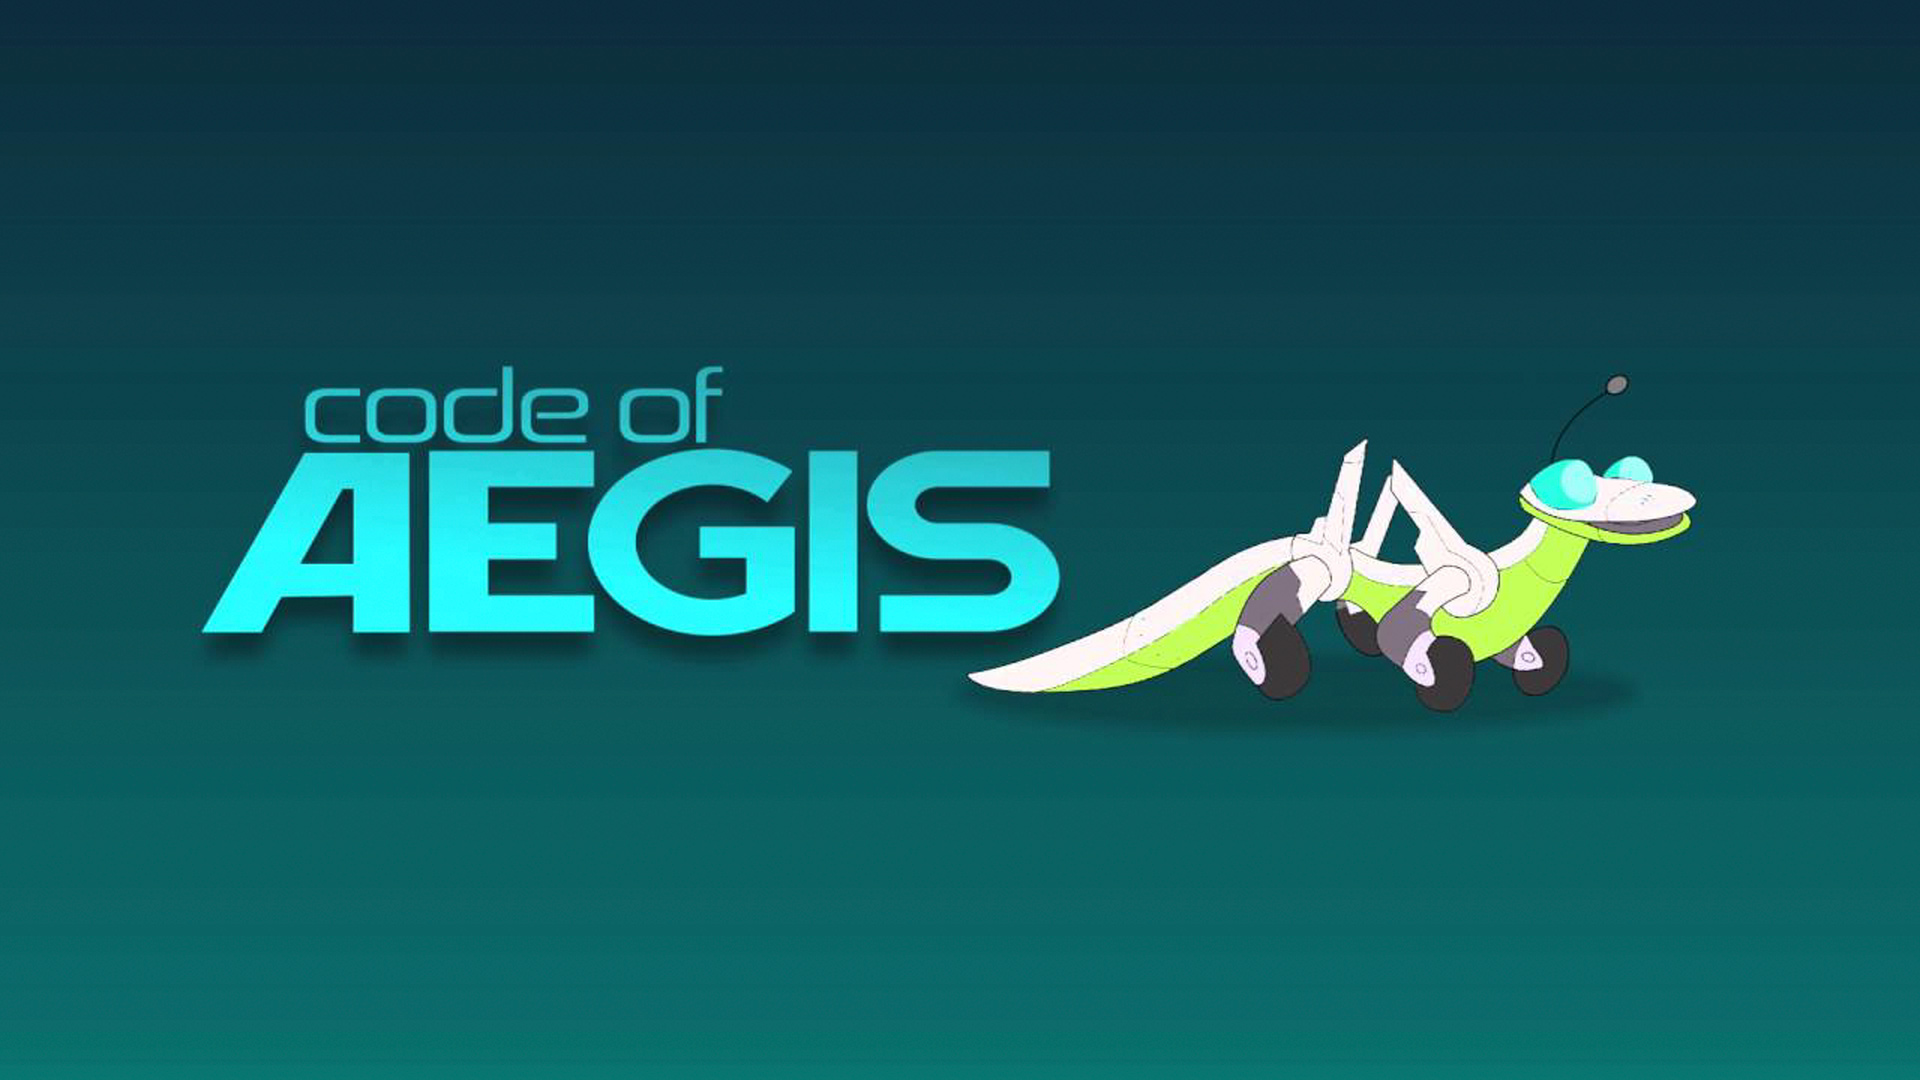 UHCL students' video game 'Code of Aegis' wins educational award